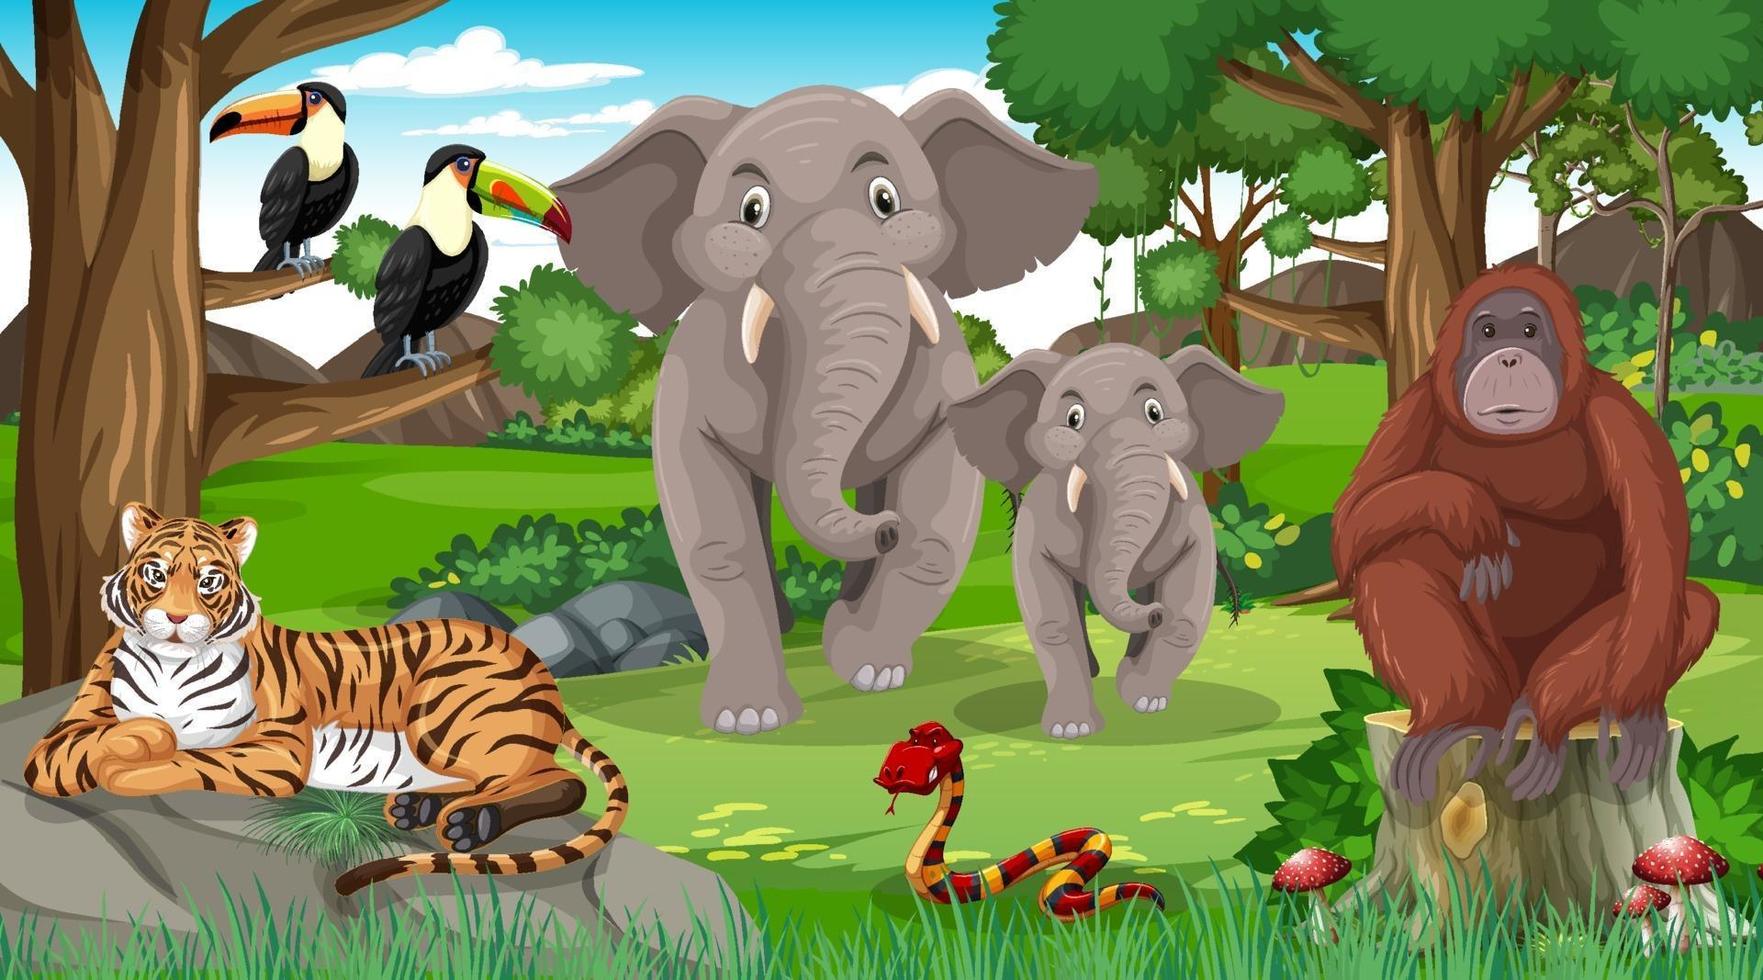 Elephant family with other wild animals in forest scene vector